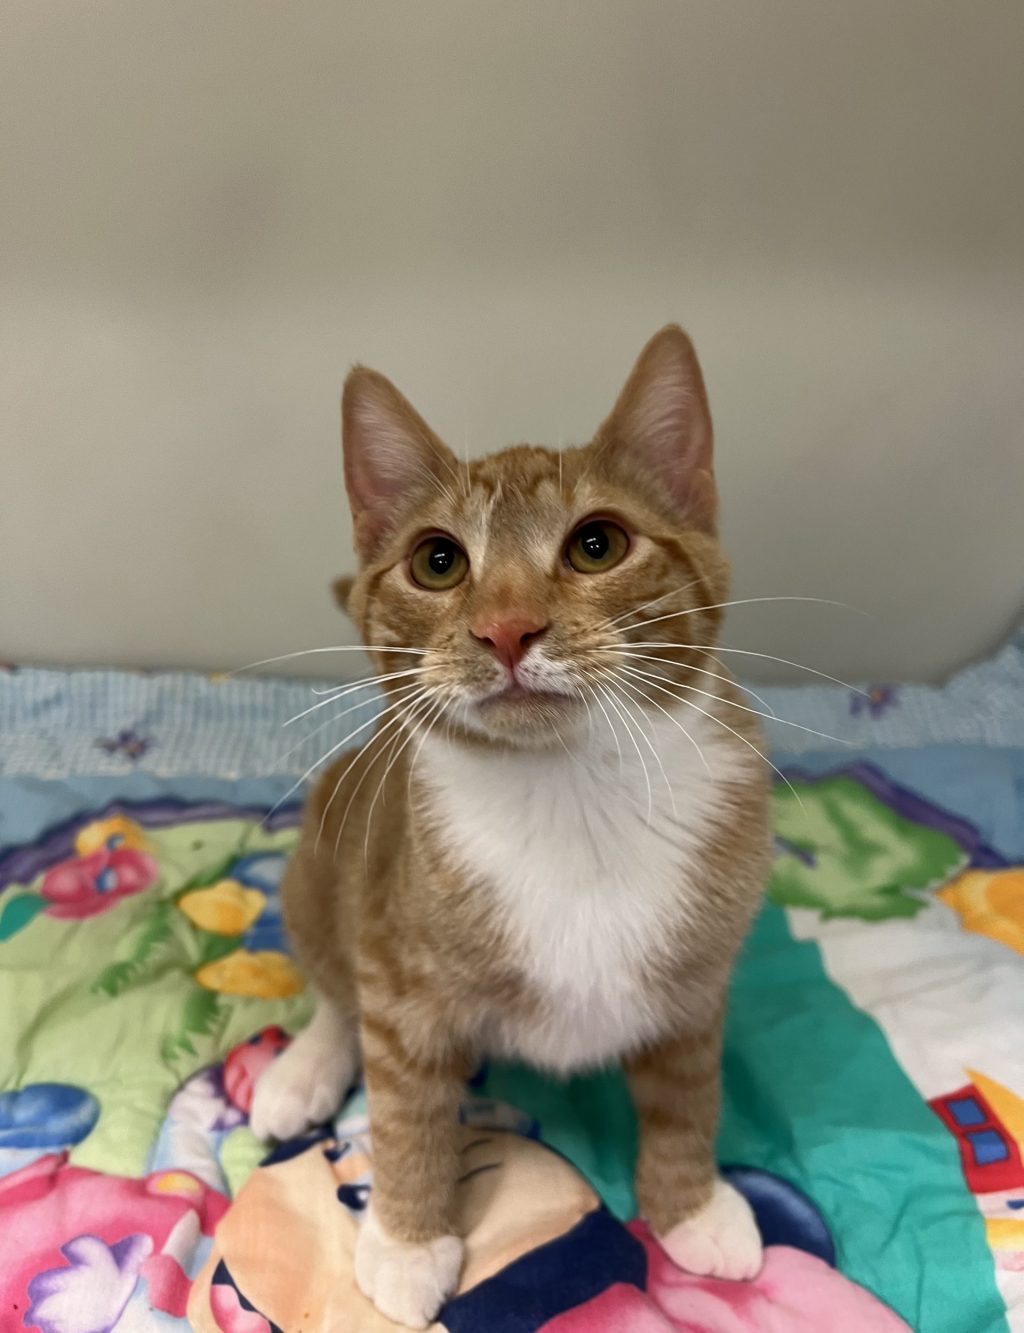 Meet Jinx! Jinx loves to be cuddled! His favorite thing is to get attention from people or play with his brother. Jinx is a super sweet and loving guy, come meet this cutie!